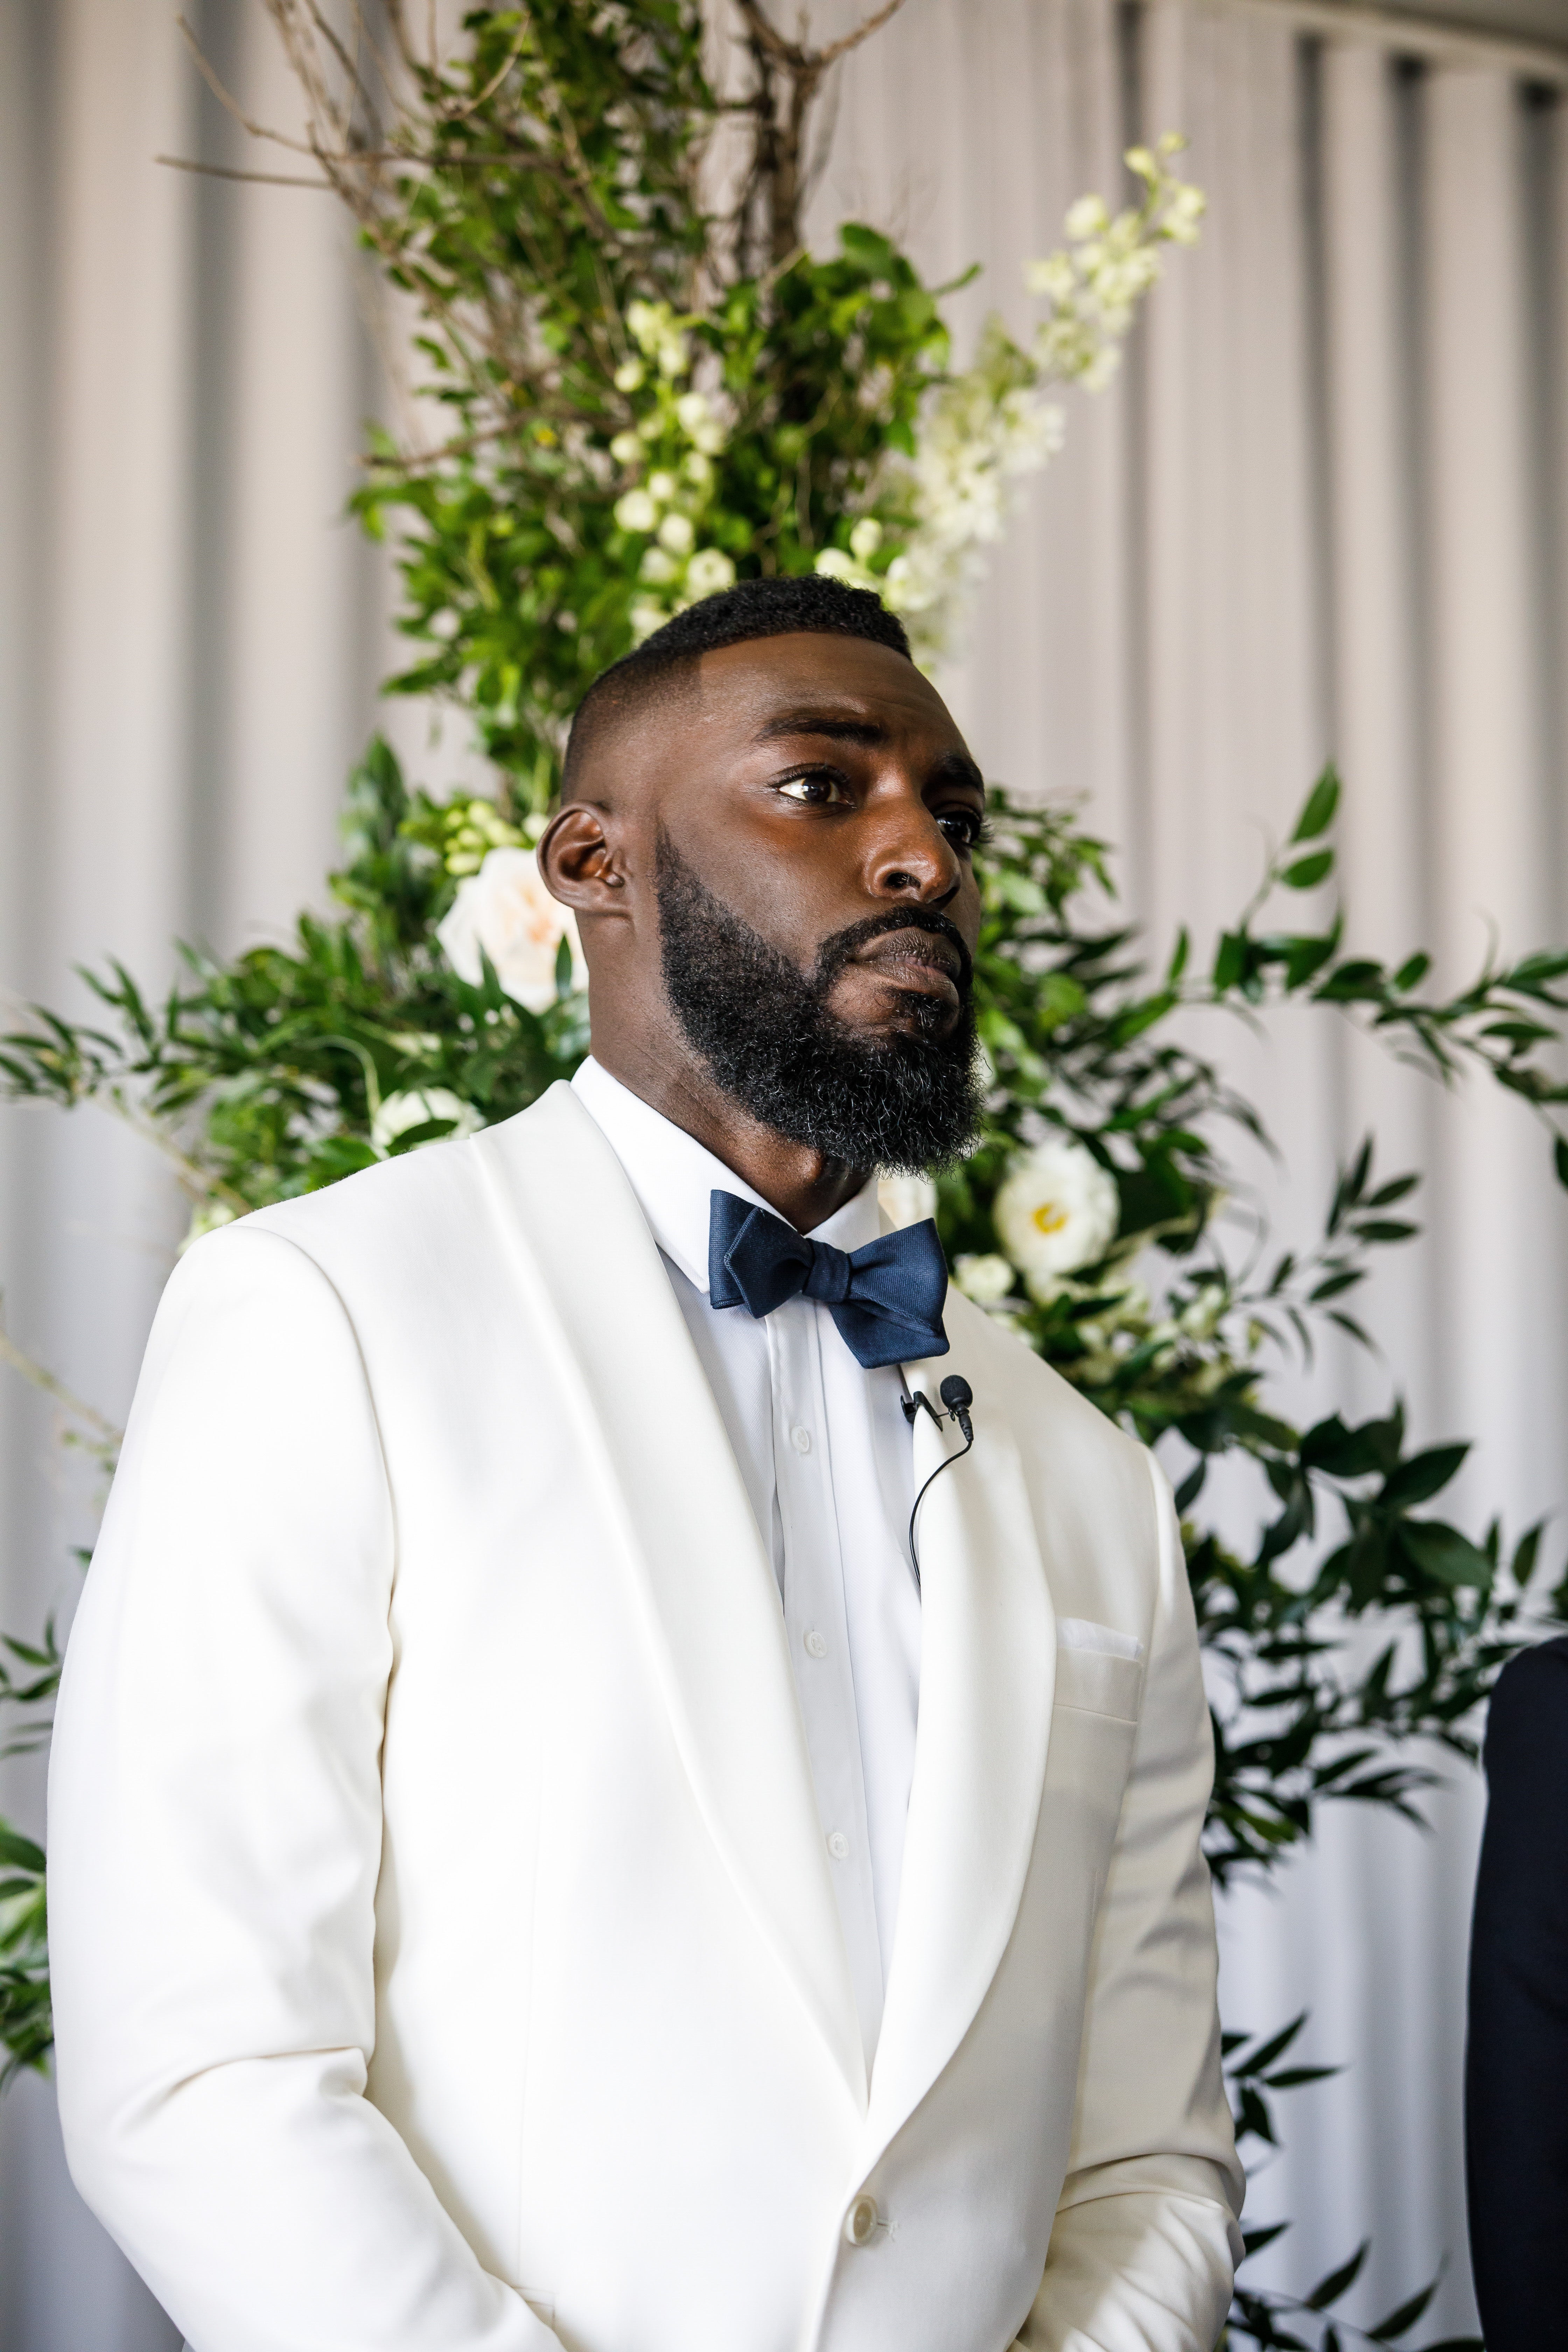 Bridal Bliss: Eric And Janell's Philly Wedding Style Deserves Applause
